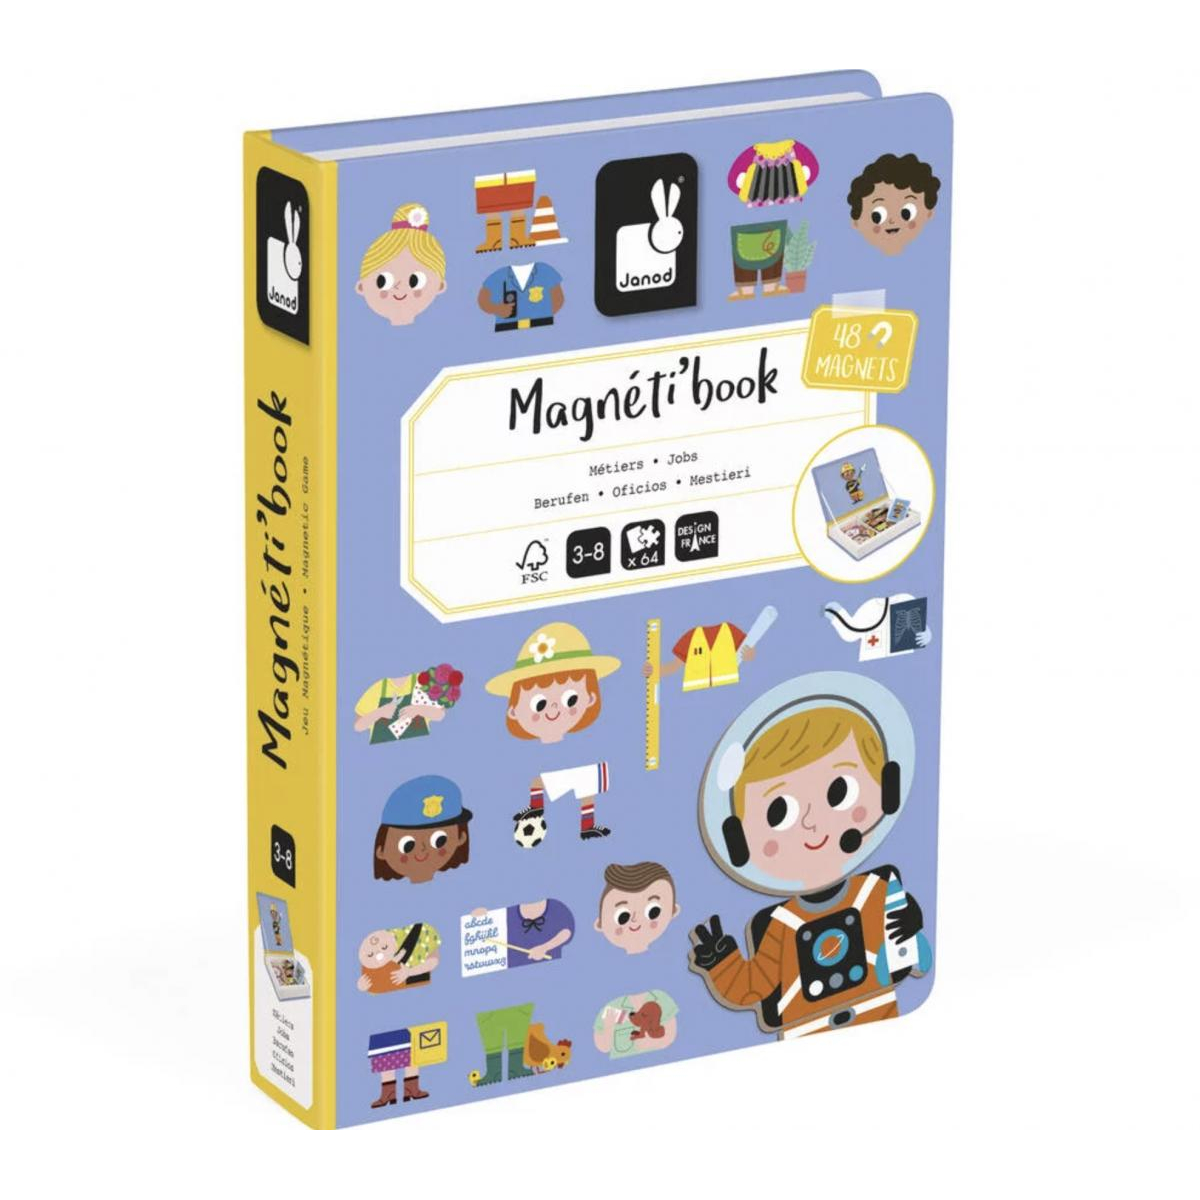 Magneti book theme metiers